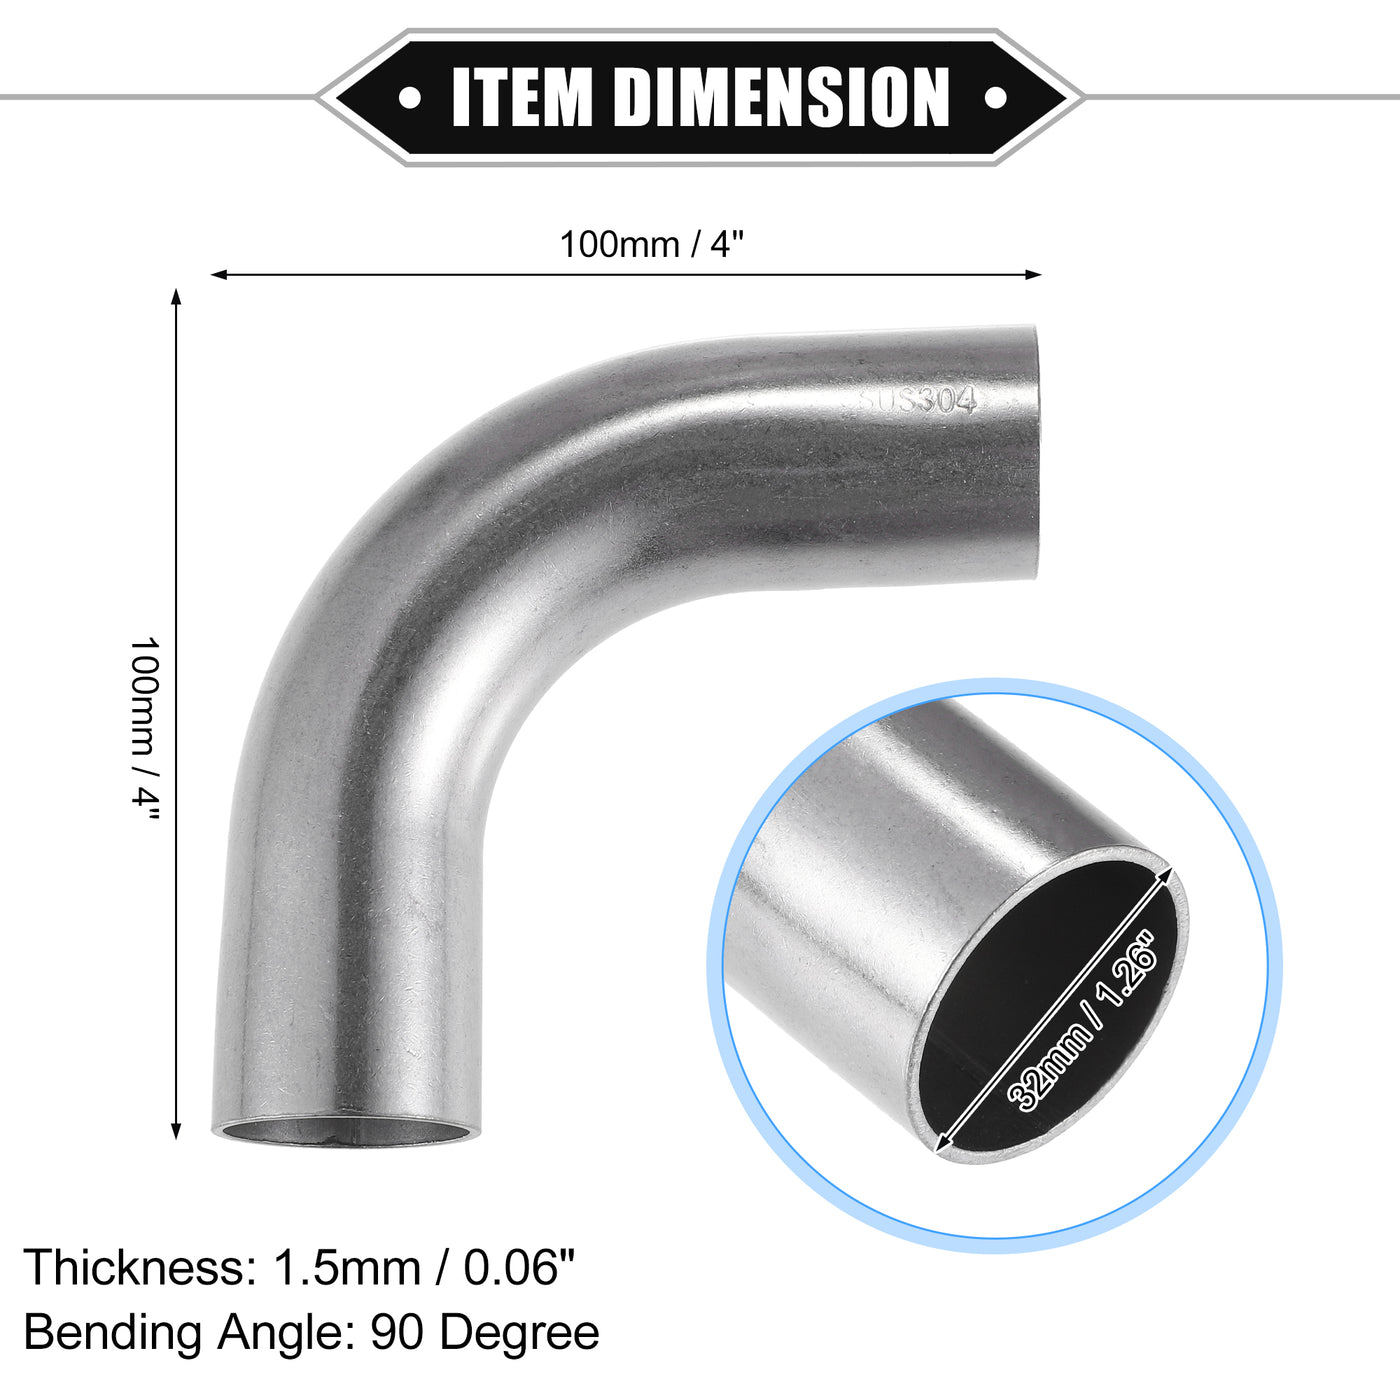 VekAuto 2 Pcs Bend Elbow Pipe Tube, 1.25" OD 4" Leg 90 Degree DIY Exhaust Pipe Intercooler Air Intake Tube Universal for Car Truck Automotive Durable 304 Stainless Steel Silver Tone